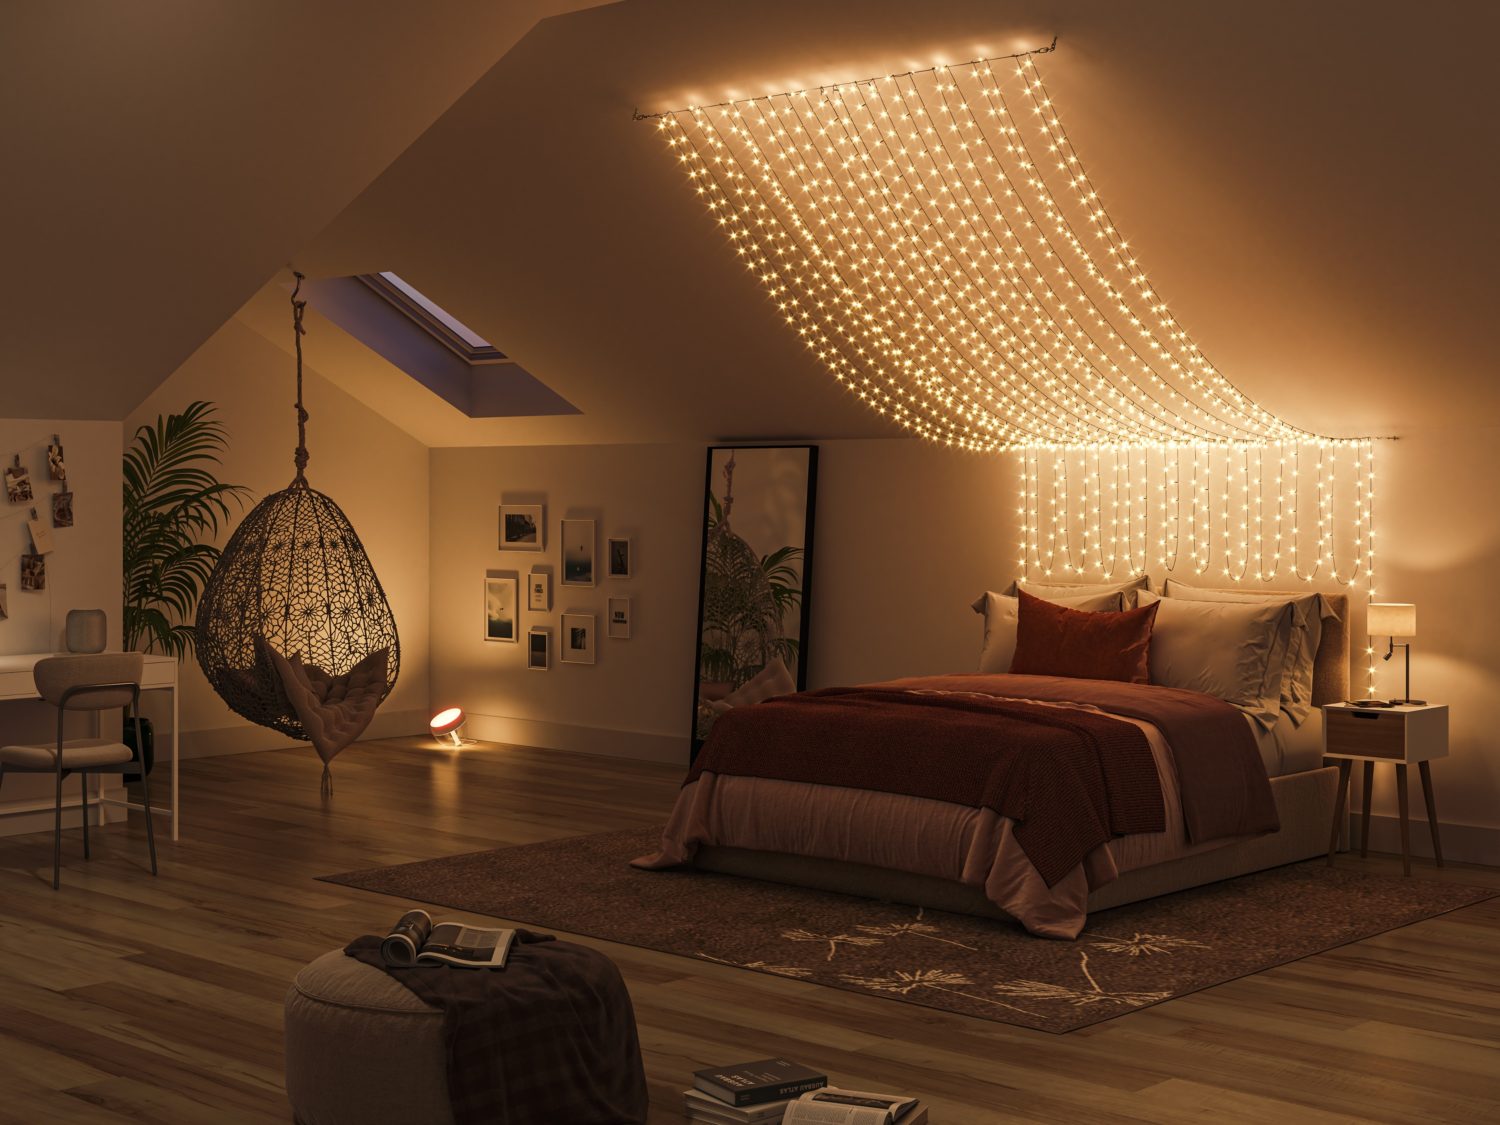 Hueblog: The Hue Festavia string light is actually just cheating